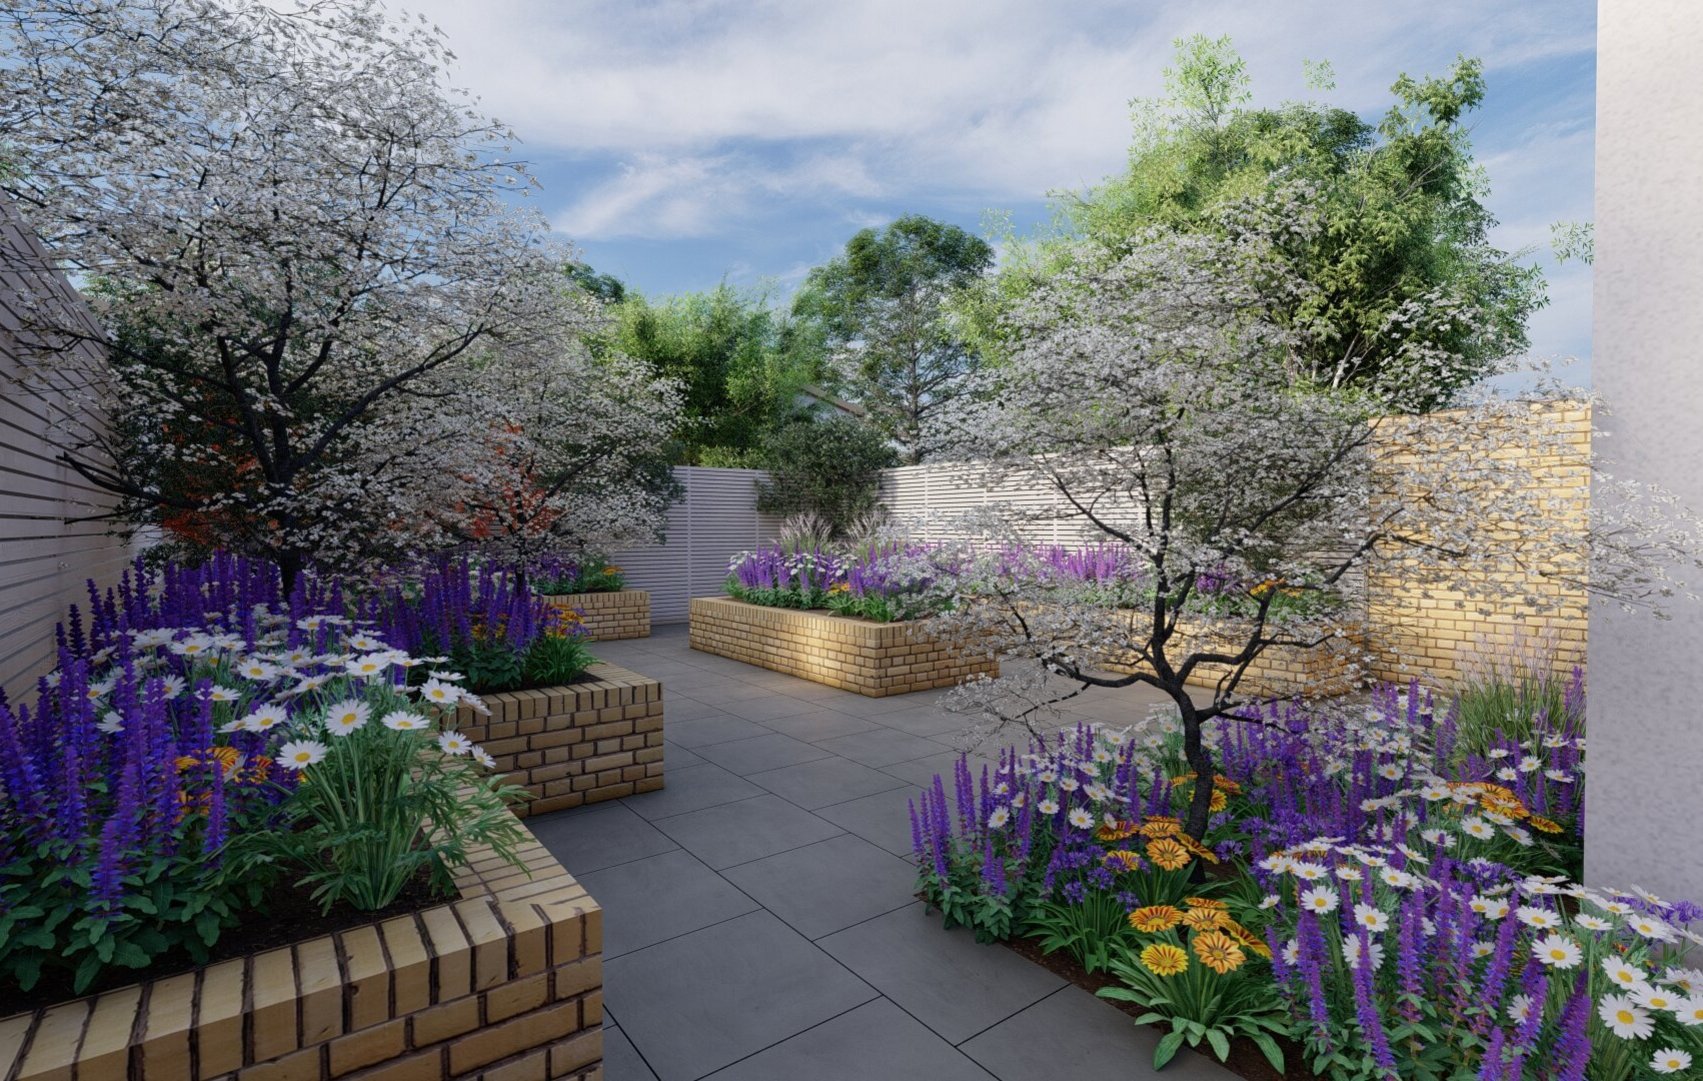 Garden Design features a series of raised beds with mixed planting including trees, shrubs and herbaceous plants for a garden in Harold's Cross, Dublin.